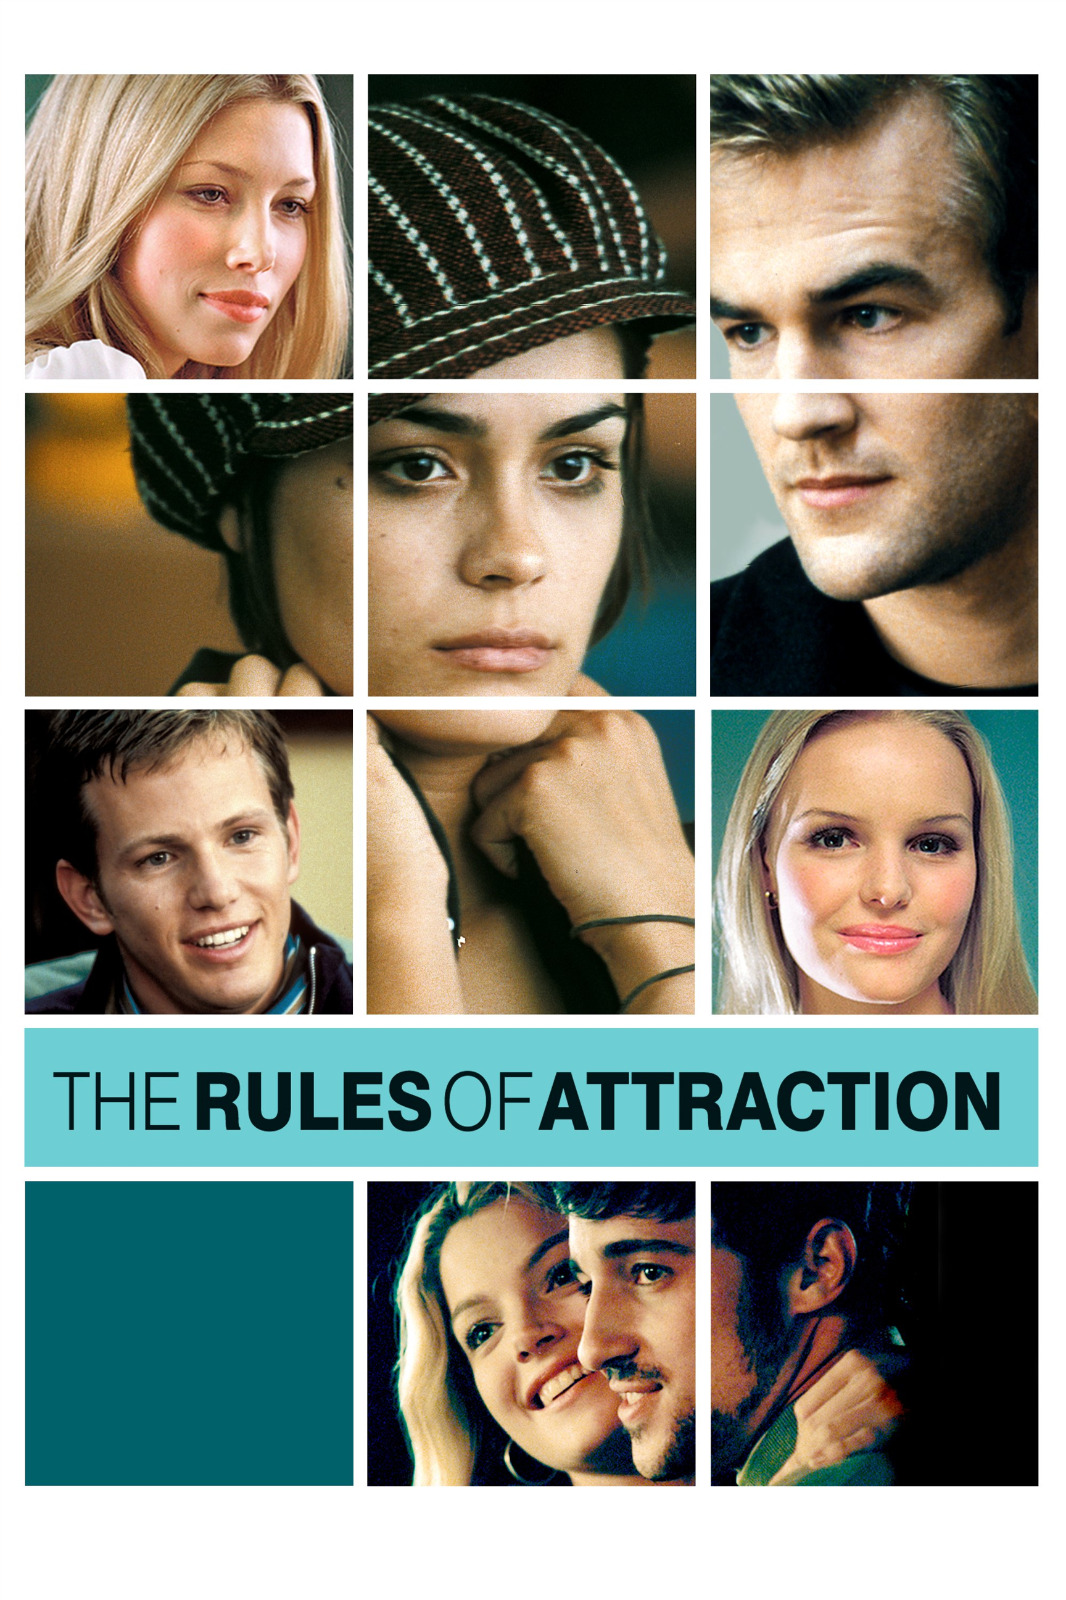 Rules of Attraction Movie Jessica Biel Kate Bosworth Shanny Poster 24x36 inches 